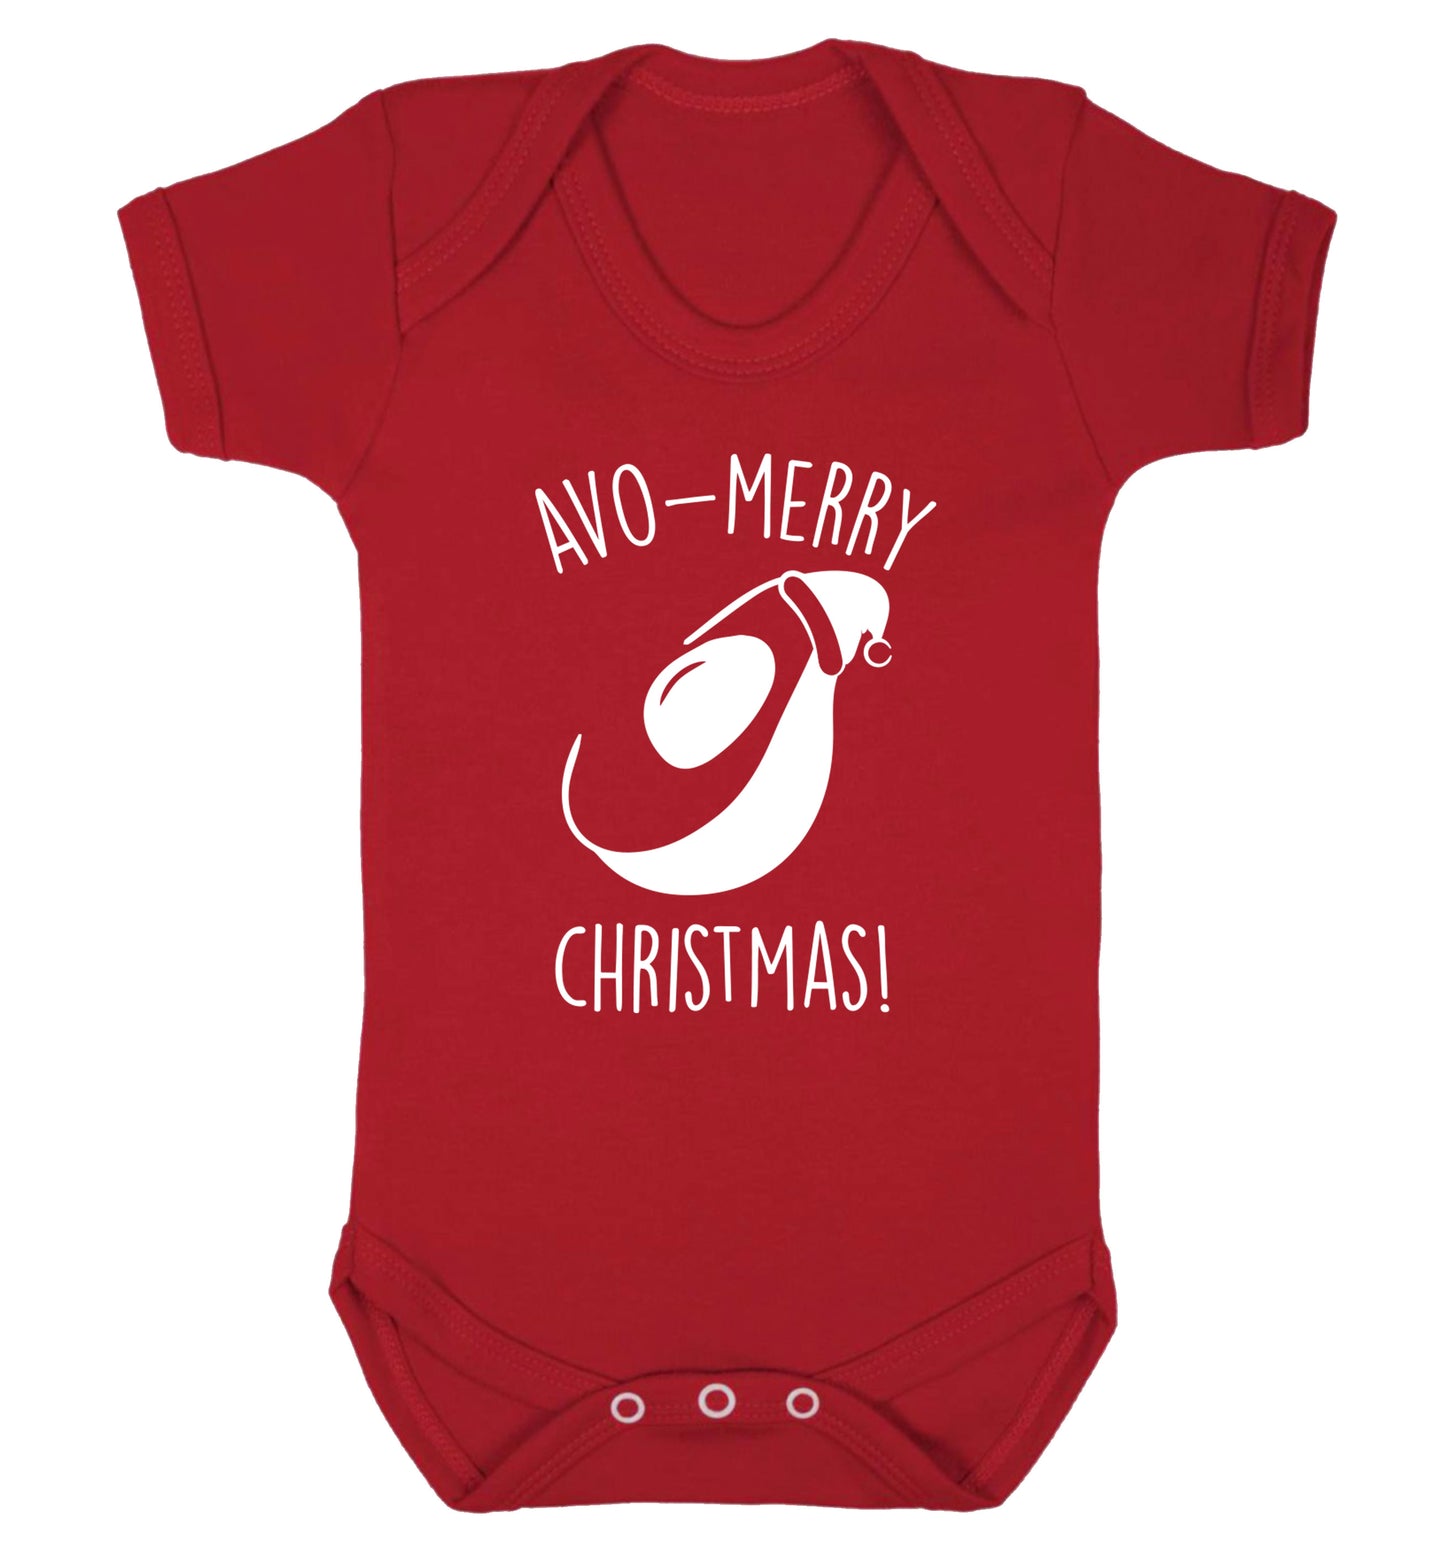 Avo-Merry Christmas Baby Vest red 18-24 months